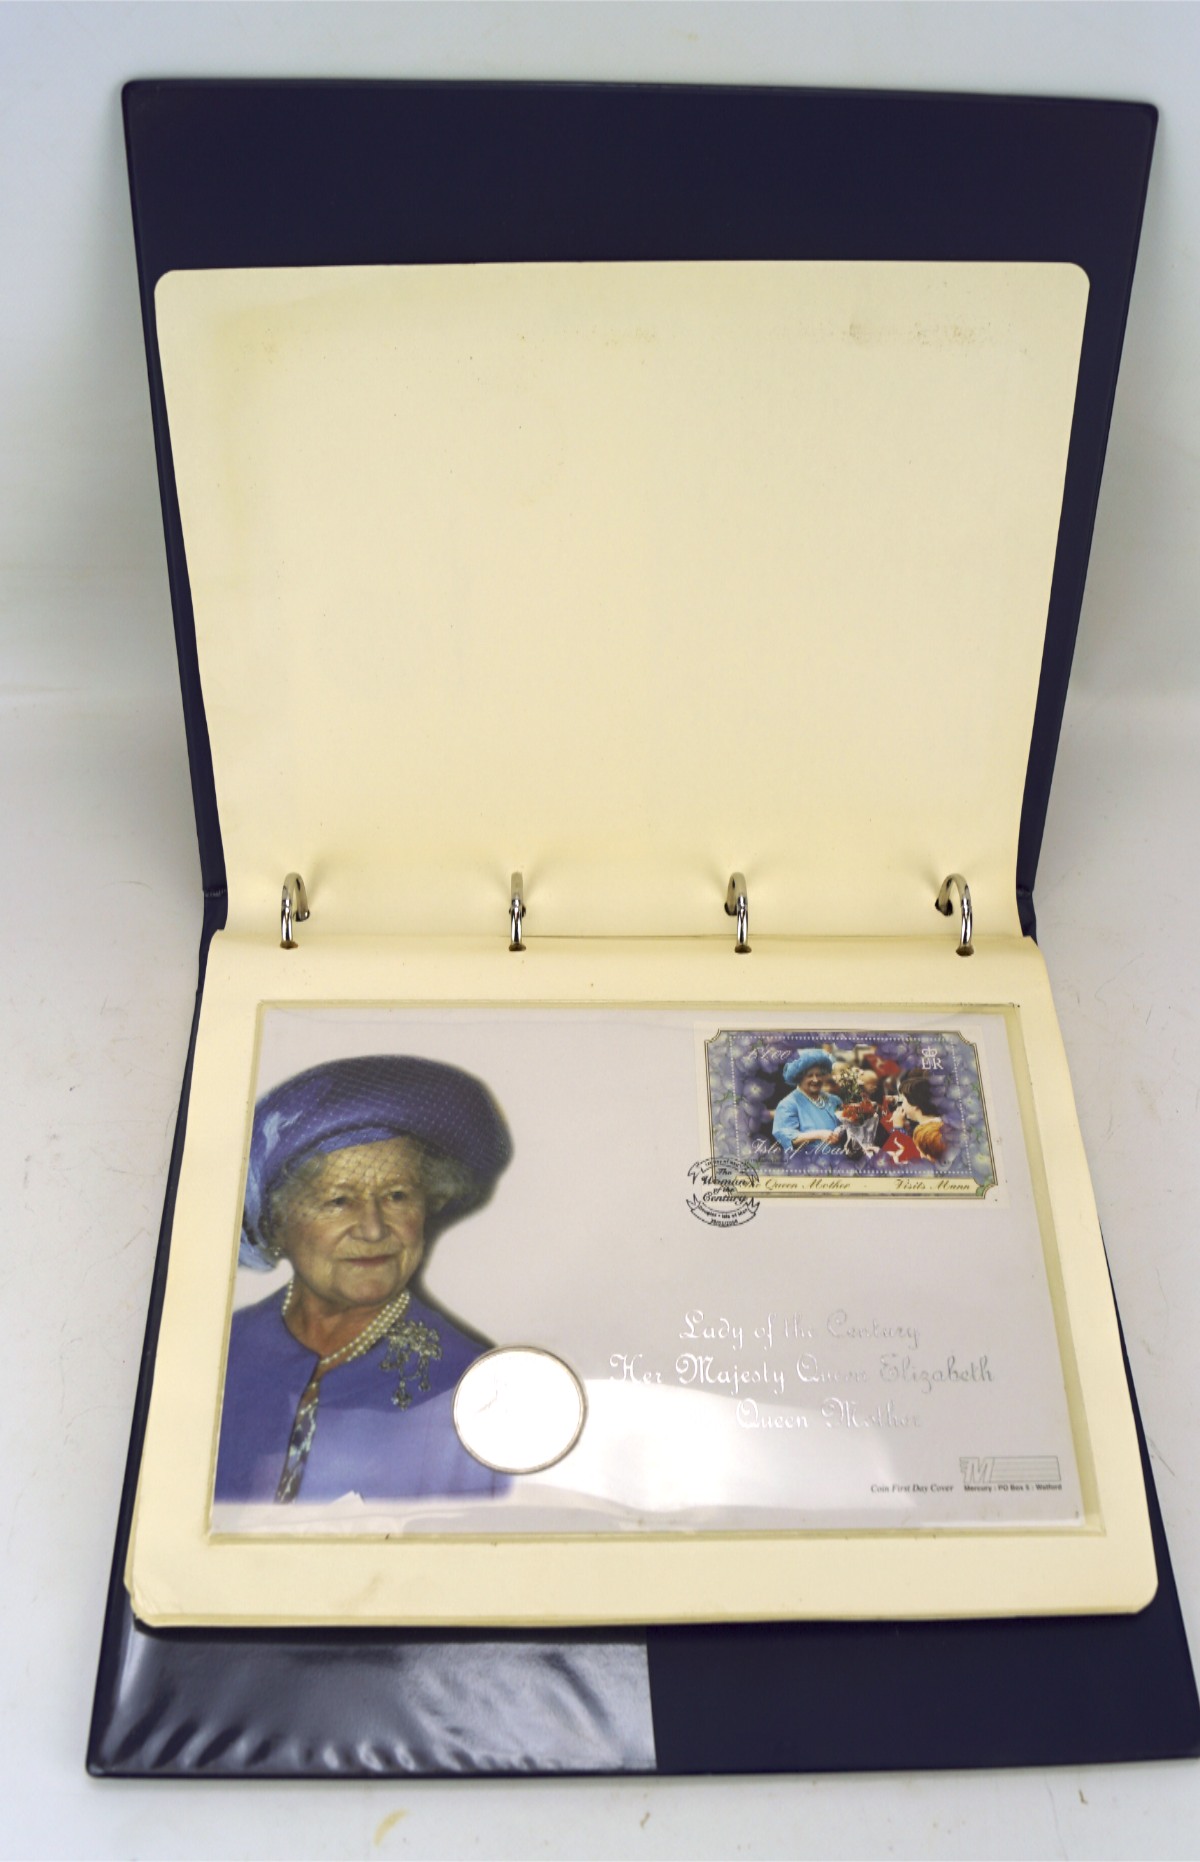 A collection of 'Royal Family' commemorative coins,